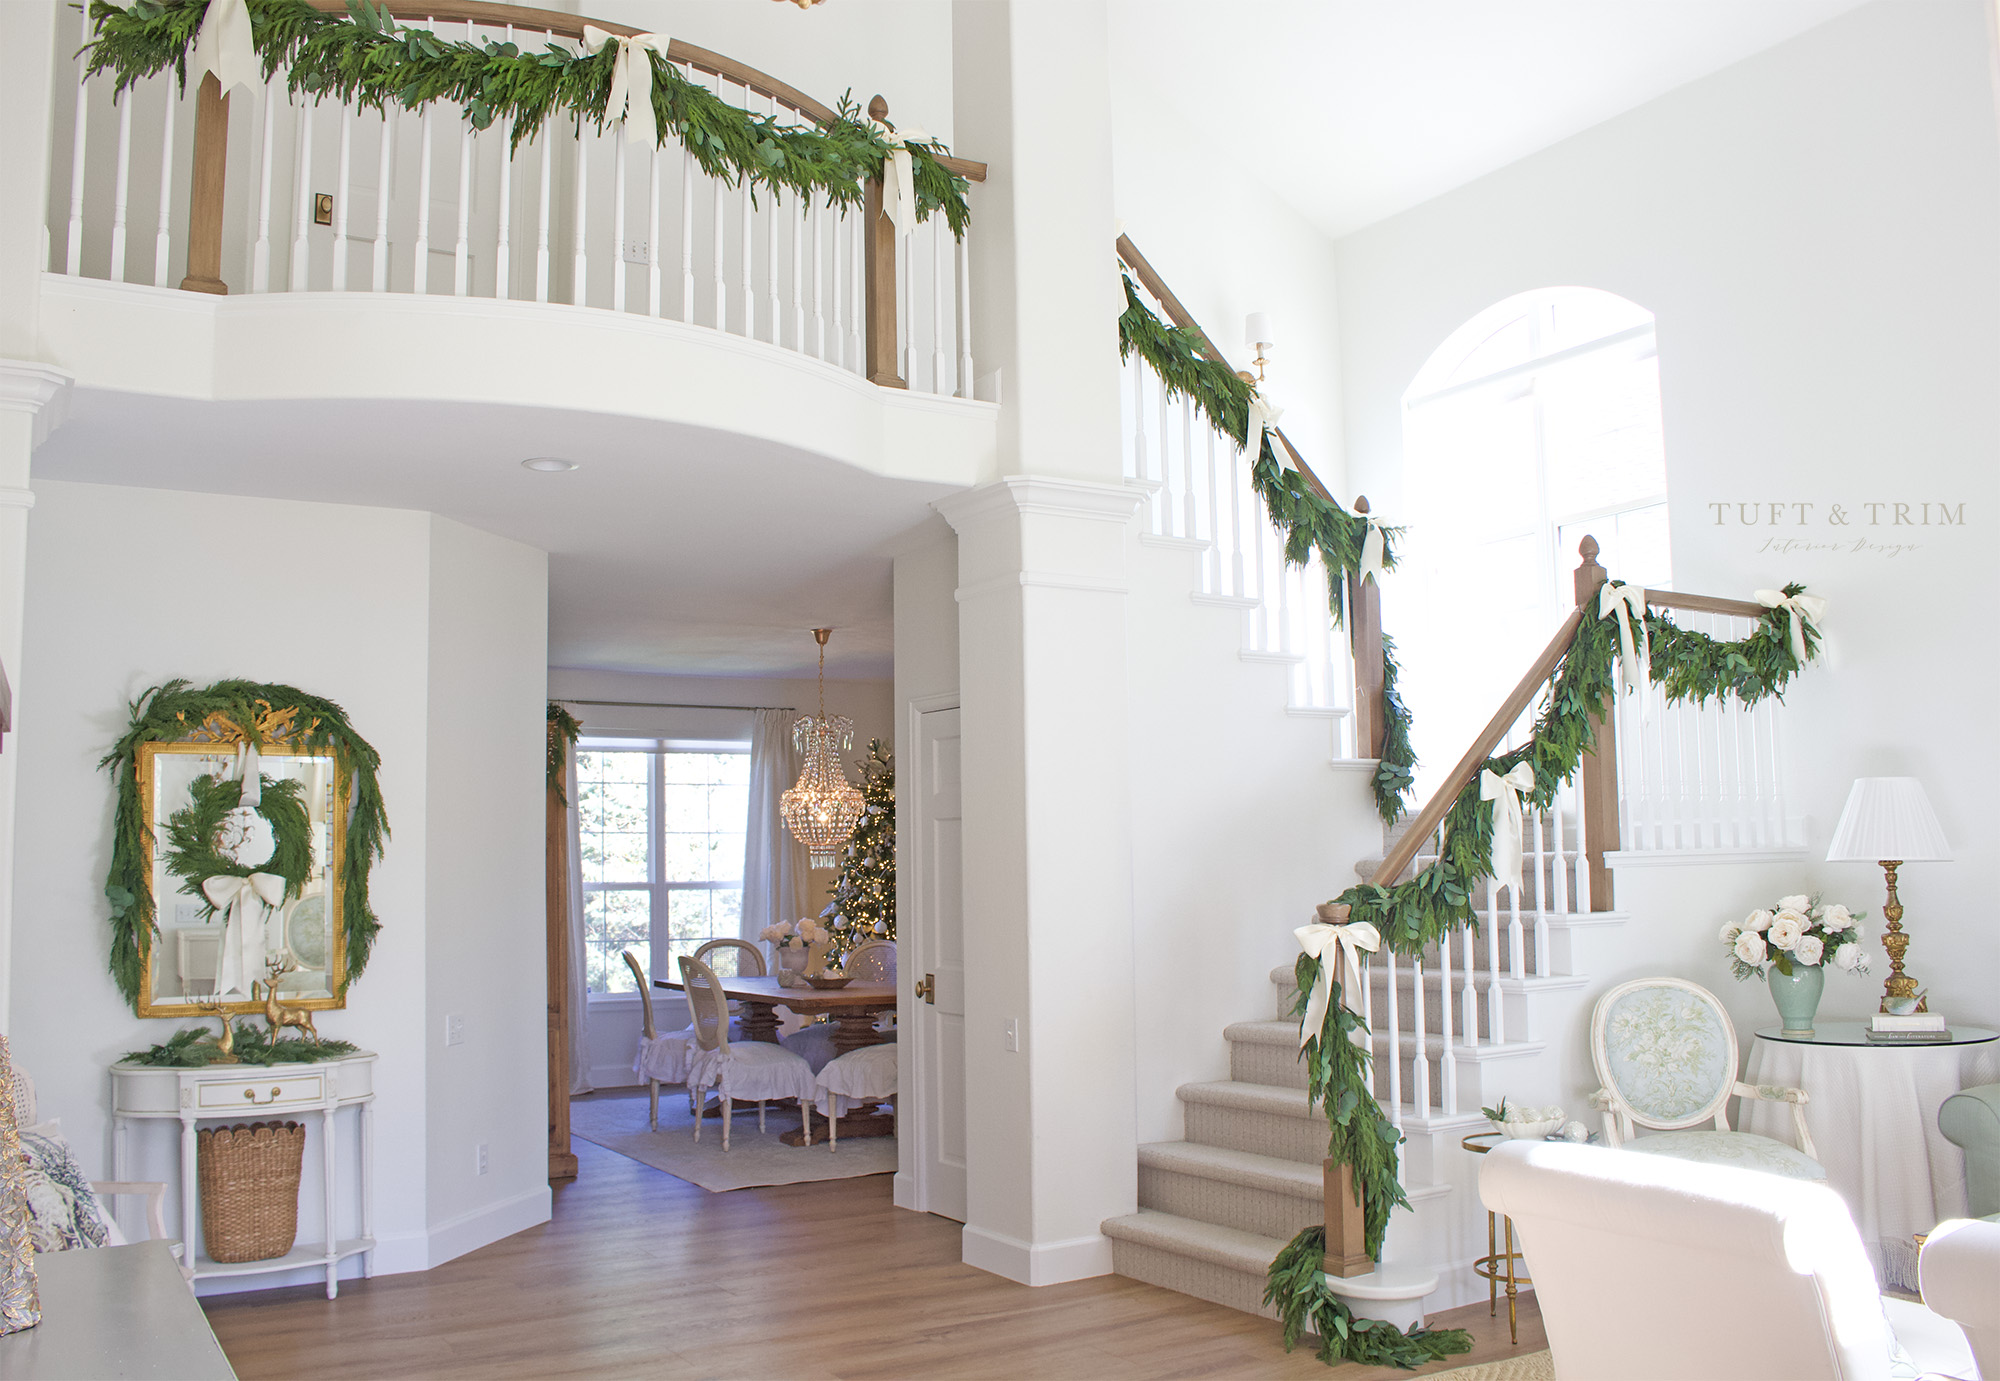 Holiday Staircase with Real Touch Faux Garland: Tuft & Trim Interiors